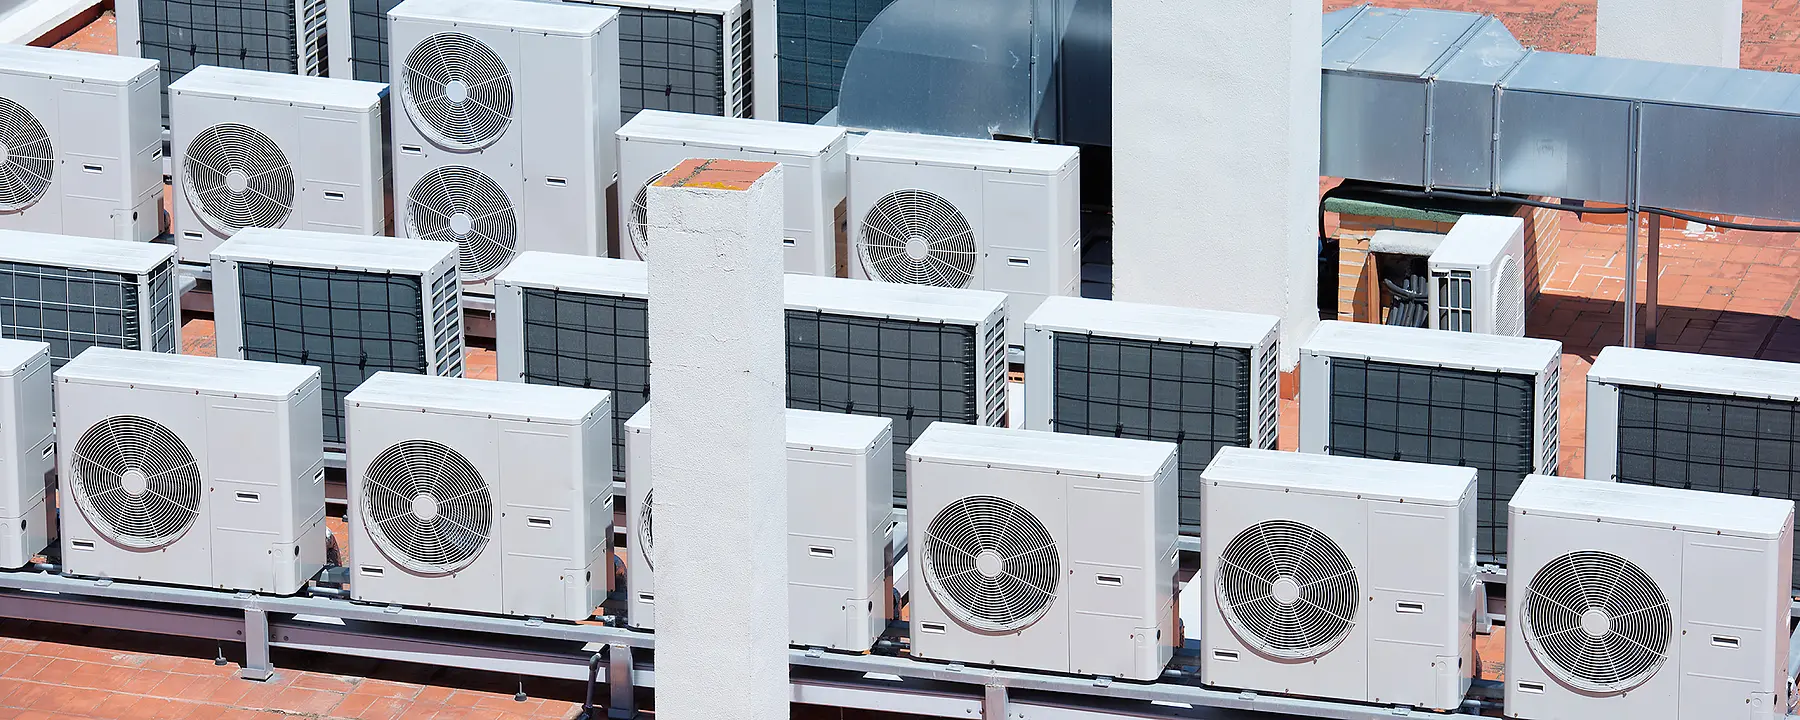 Air conditioners in Abu Dhabi